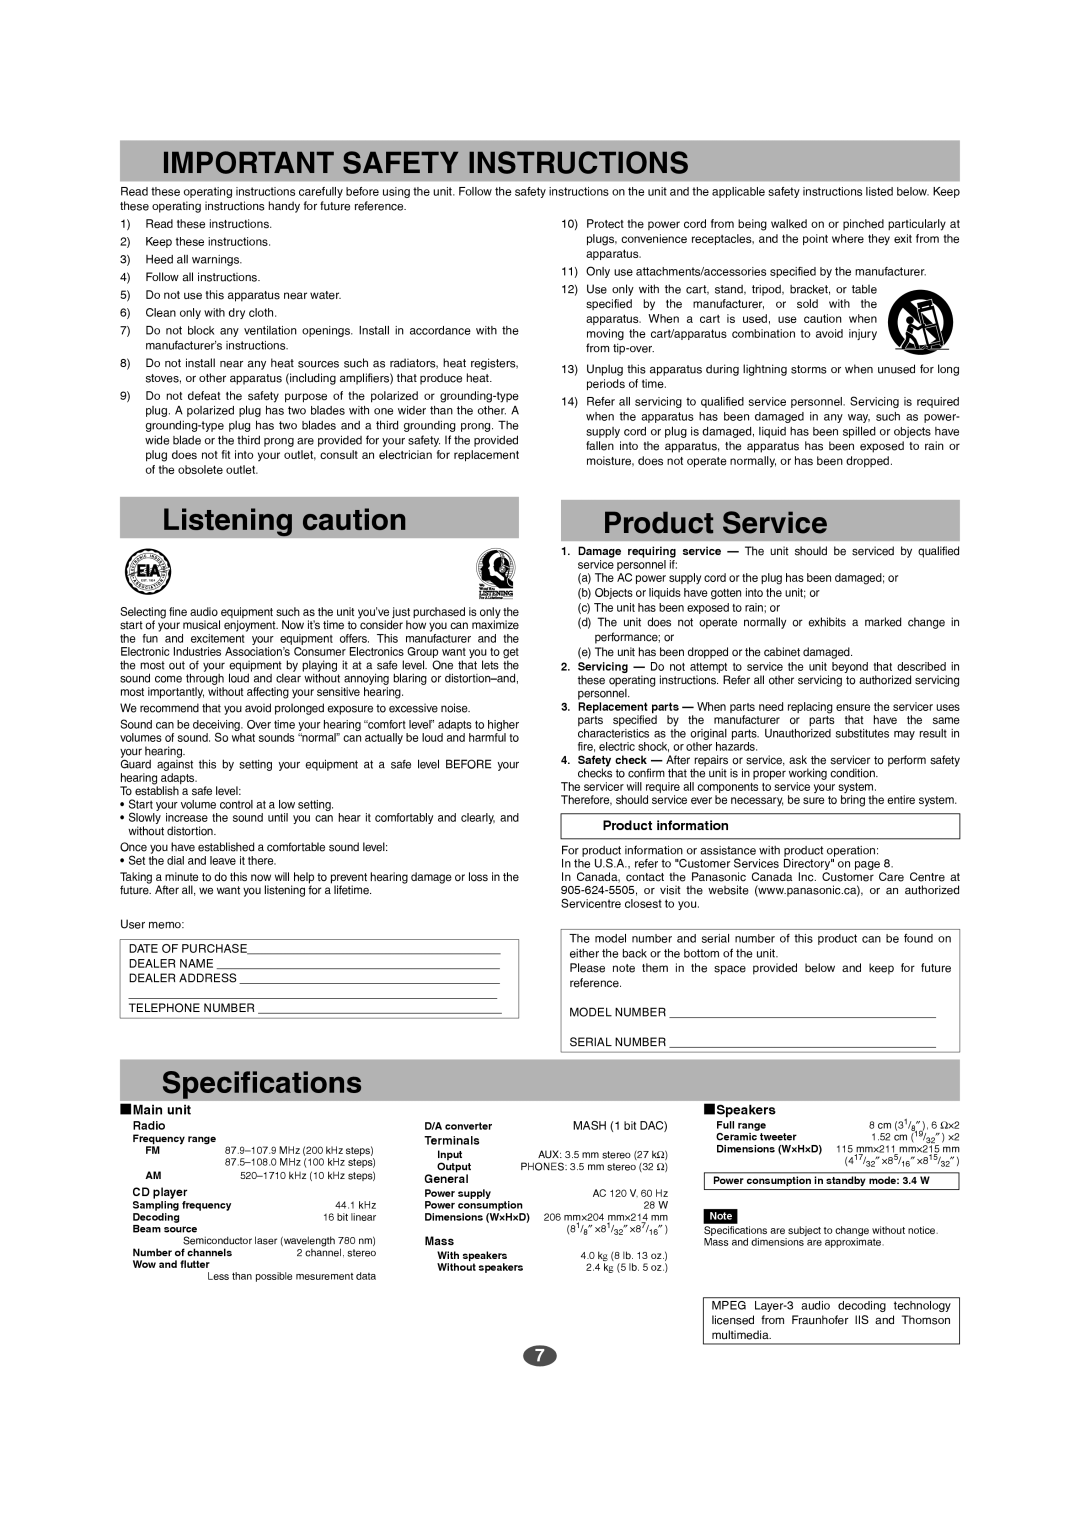 Panasonic SC-EN15 Important Safety Instructions, Listening caution, Specifications, Product Service, Product information 